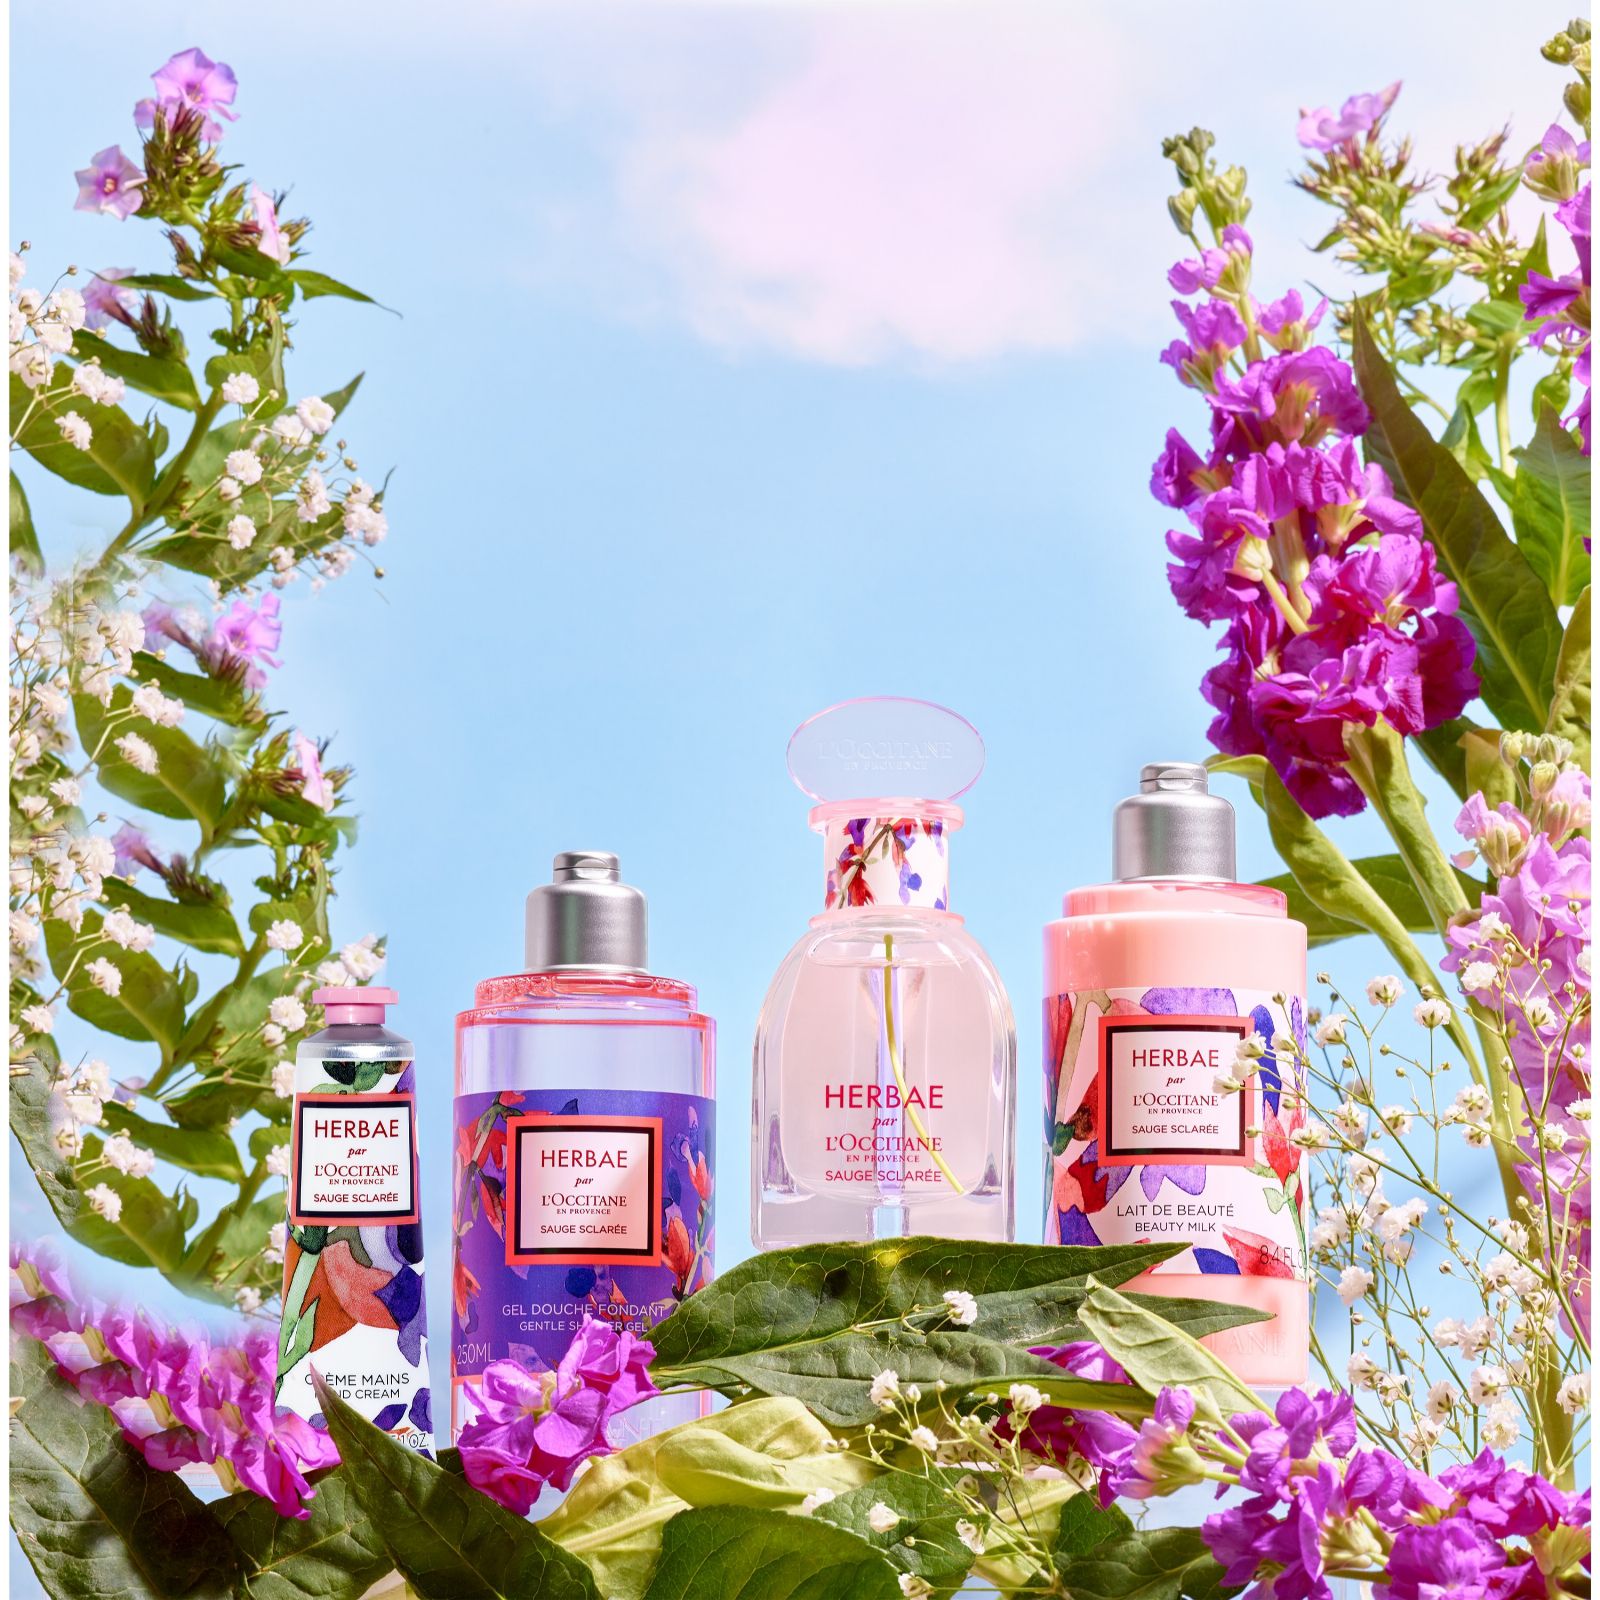 L'Occitane Herbae Clary Sage 4 Piece Gift of Fragrance Collection - QVC UK